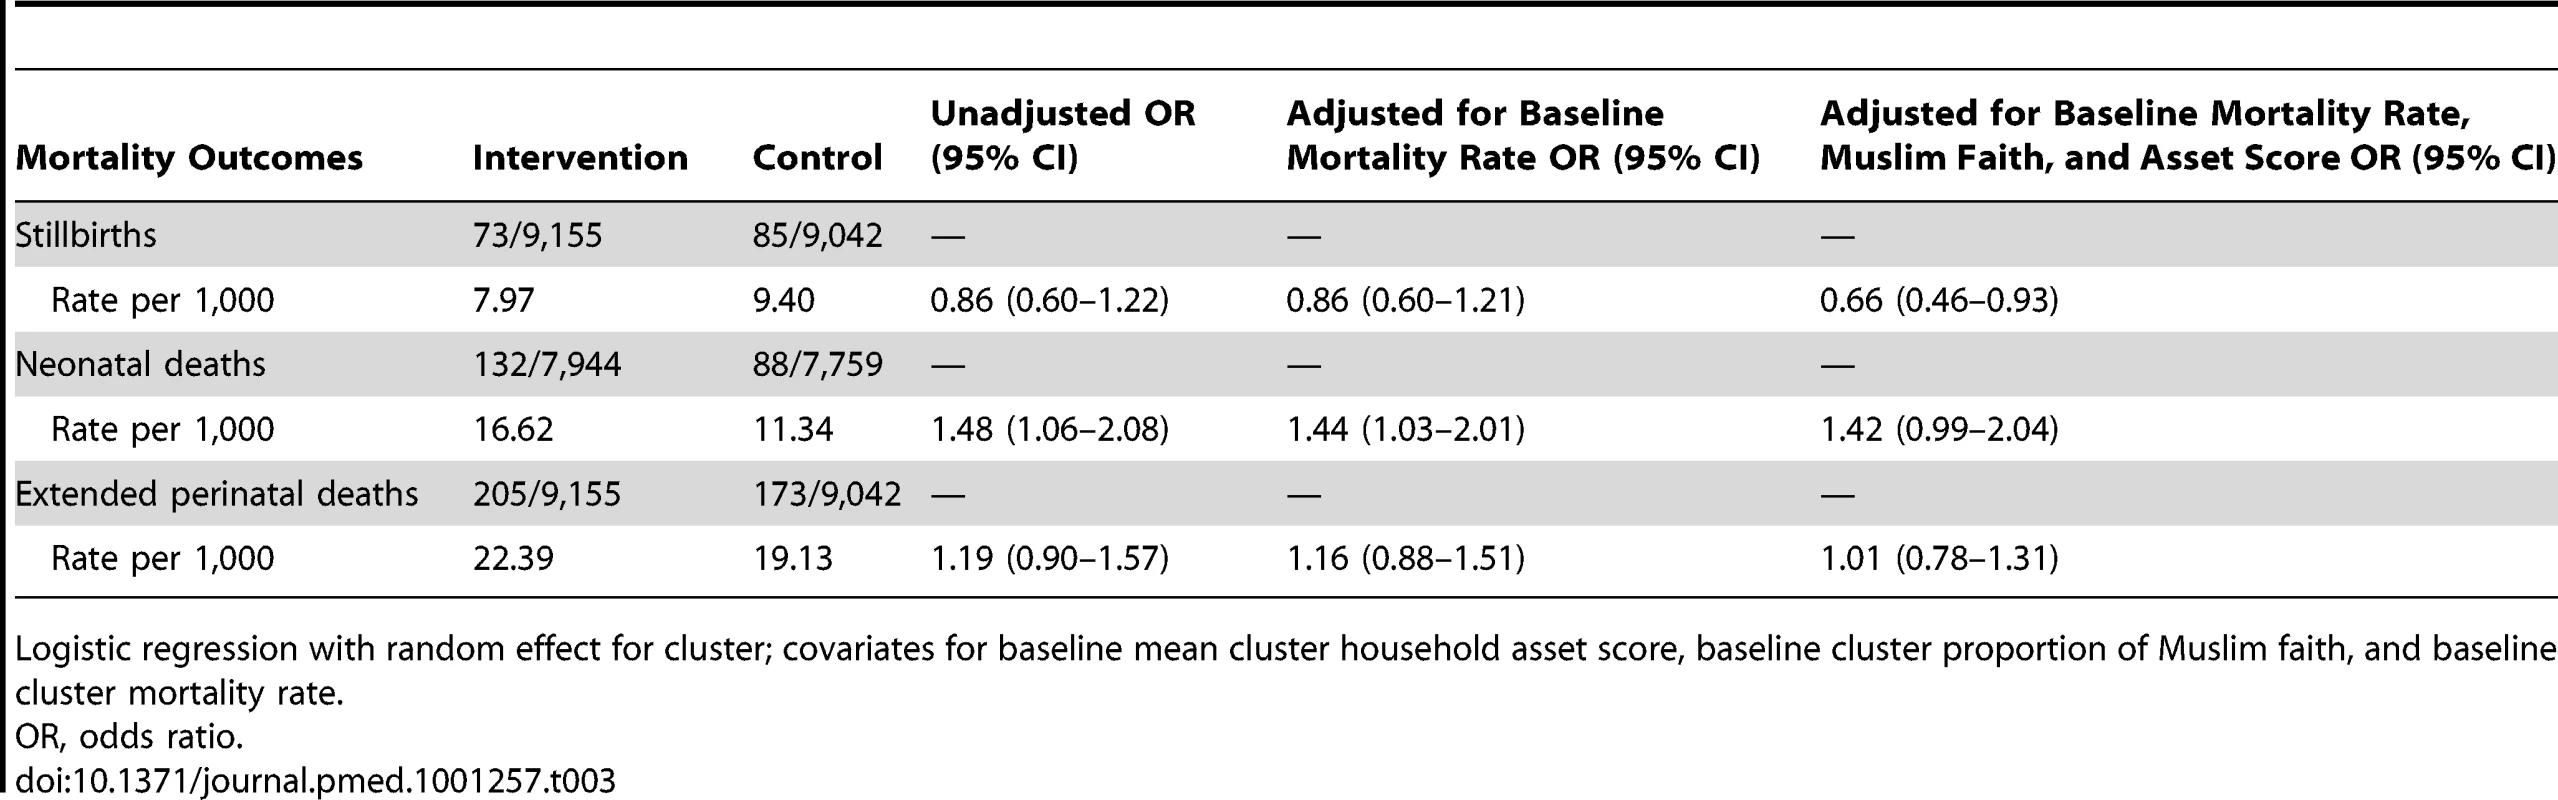 Primary analysis of mortality outcomes over 3 y, comparing intervention and control arms.